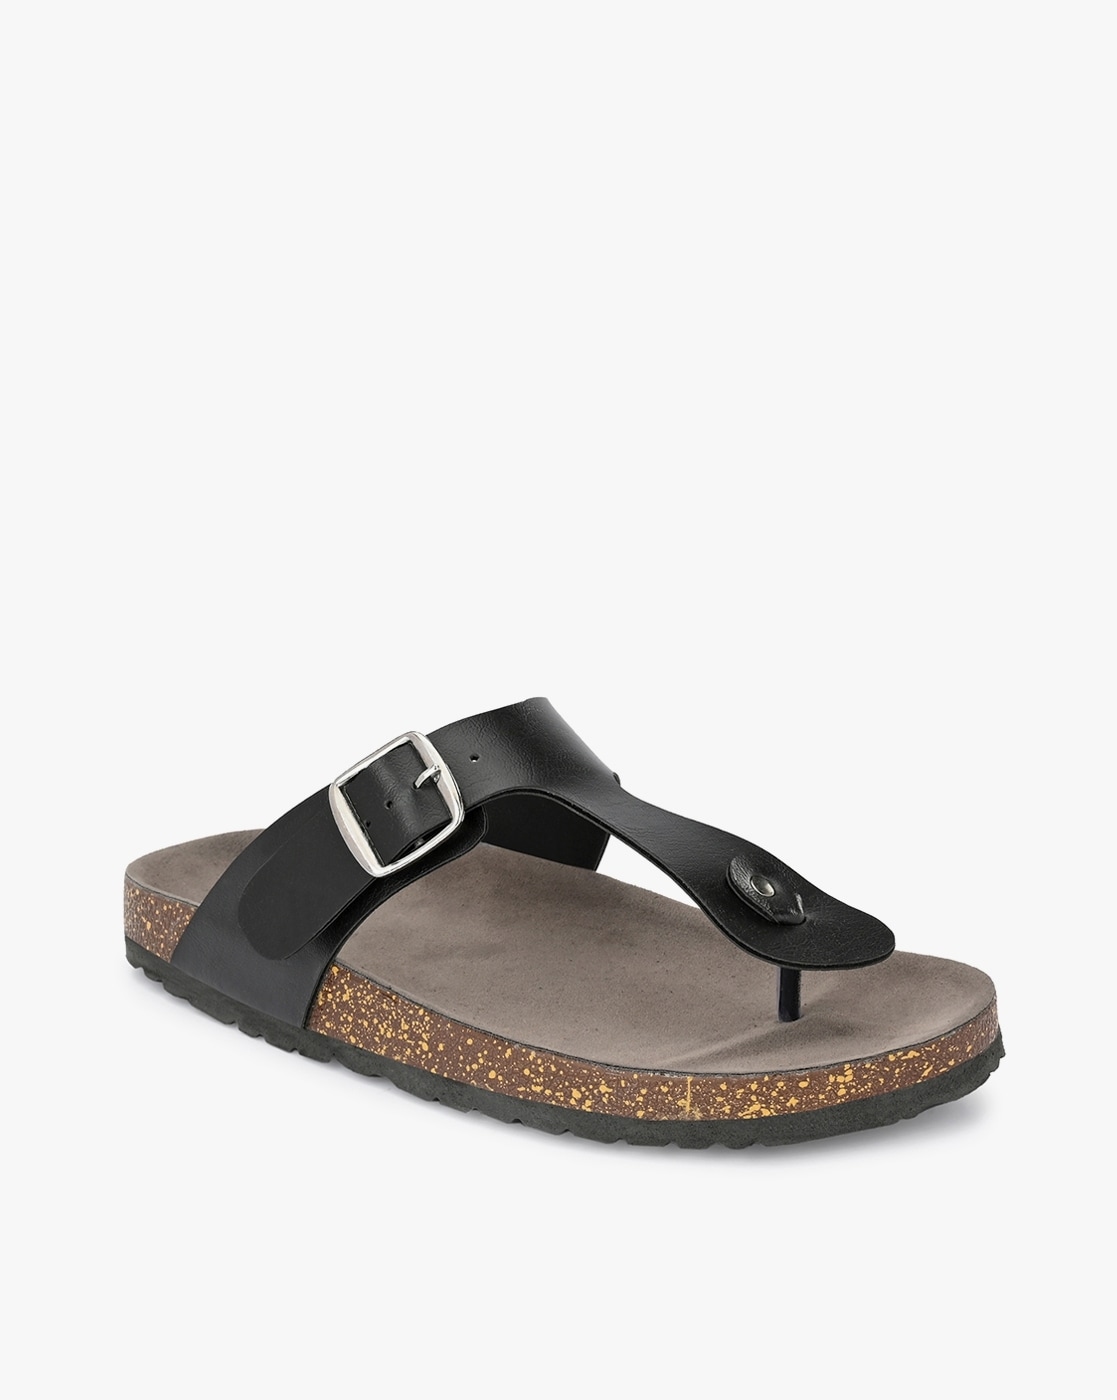 iSlide Motto Slip-On Slide Sandals - Full-Color Personalization Available |  Positive Promotions